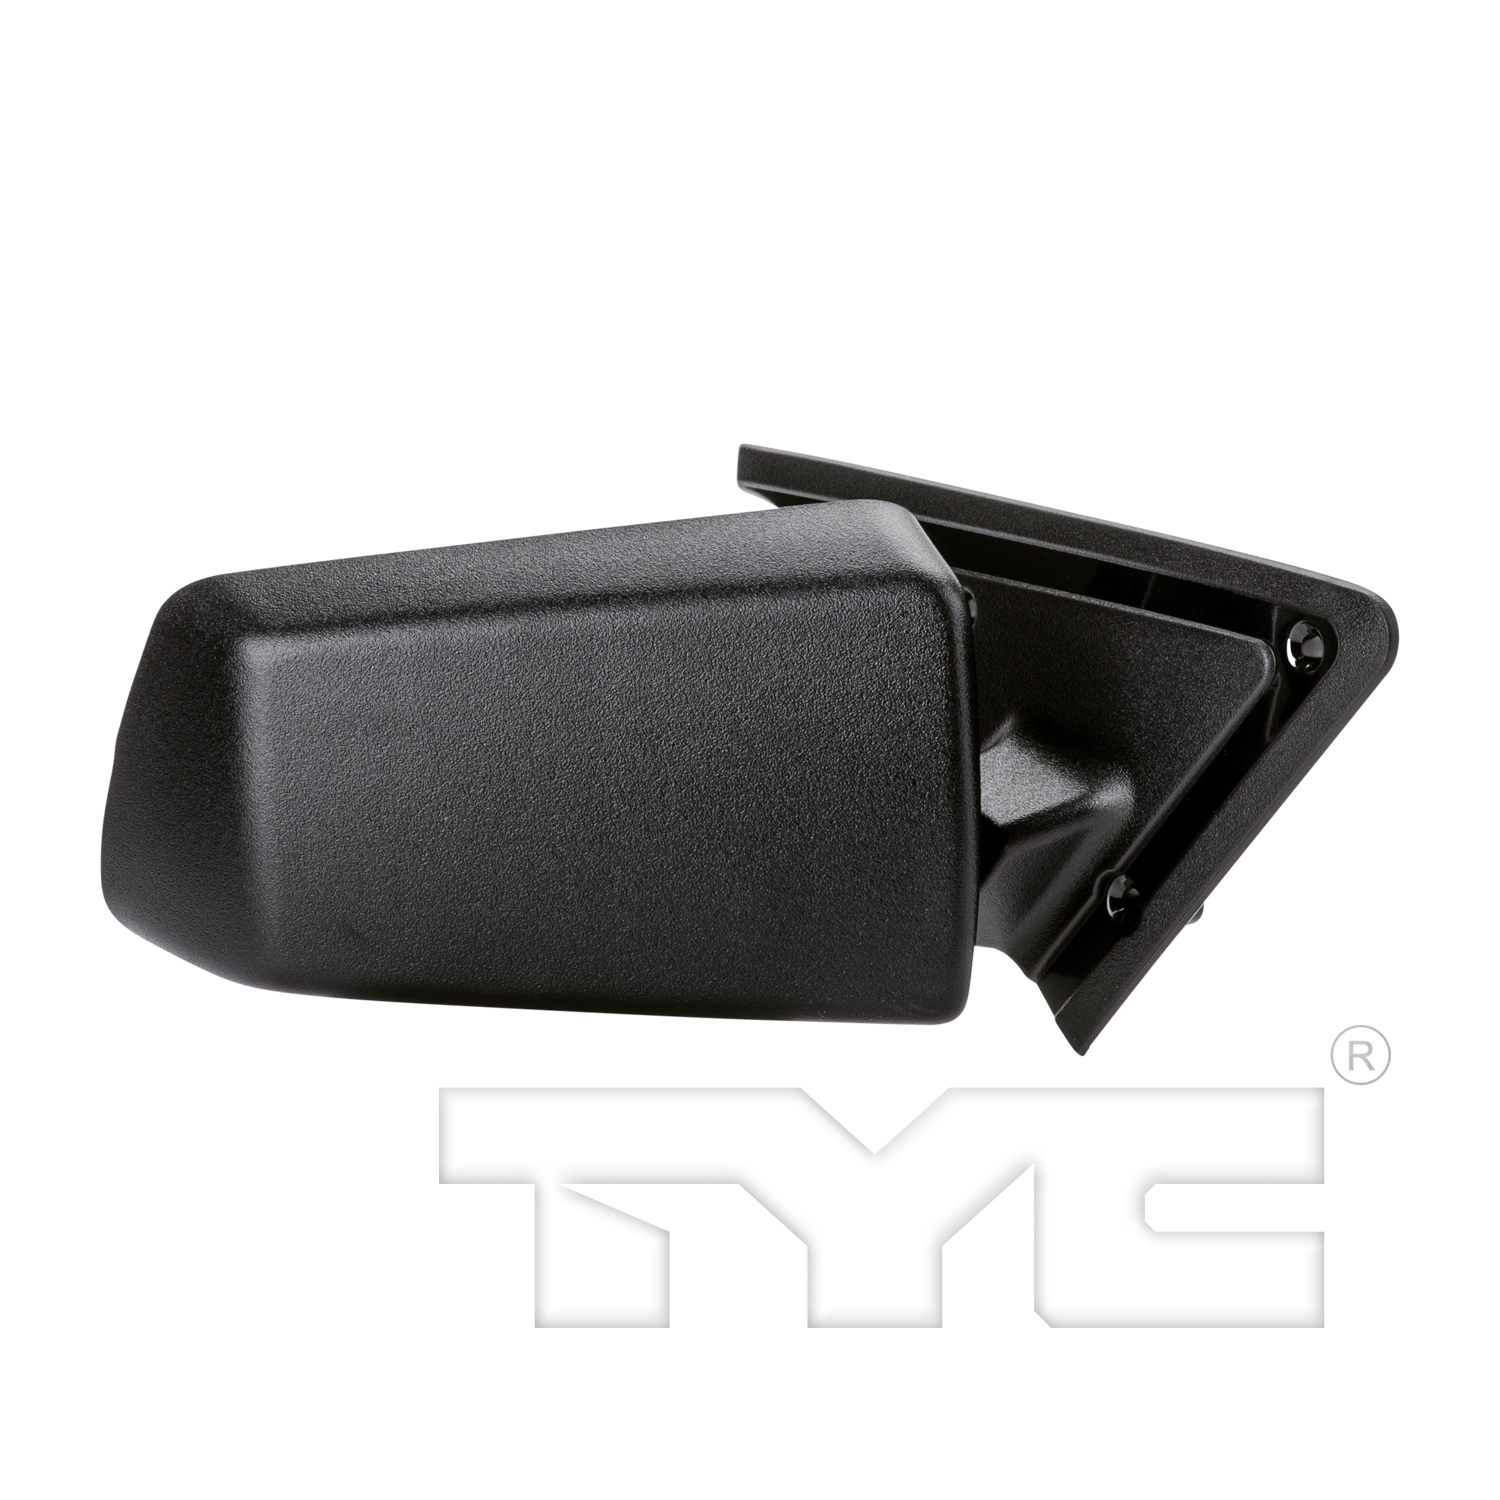 Aftermarket MIRRORS for GMC - S15 JIMMY, S15 JIMMY,85-91,RT Mirror outside rear view